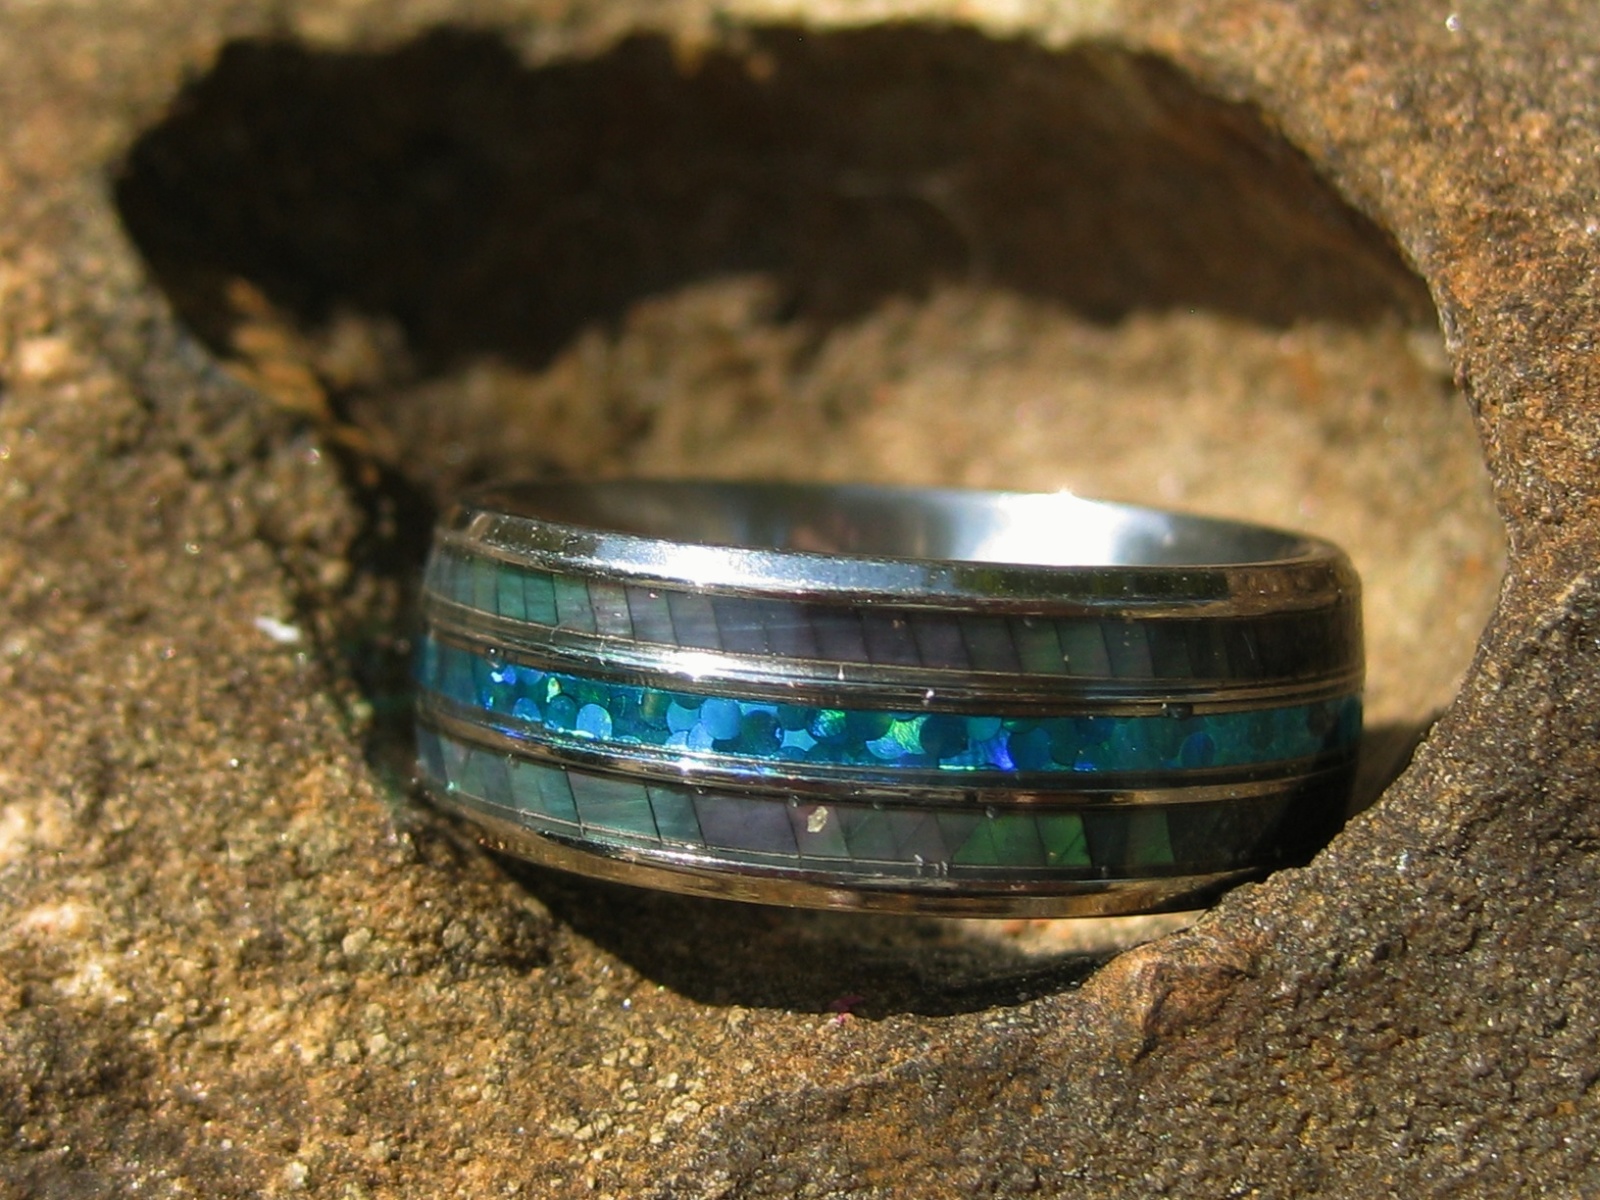 Haunted Ring The SHINING ONES djinn ring of unlimited wishes granted